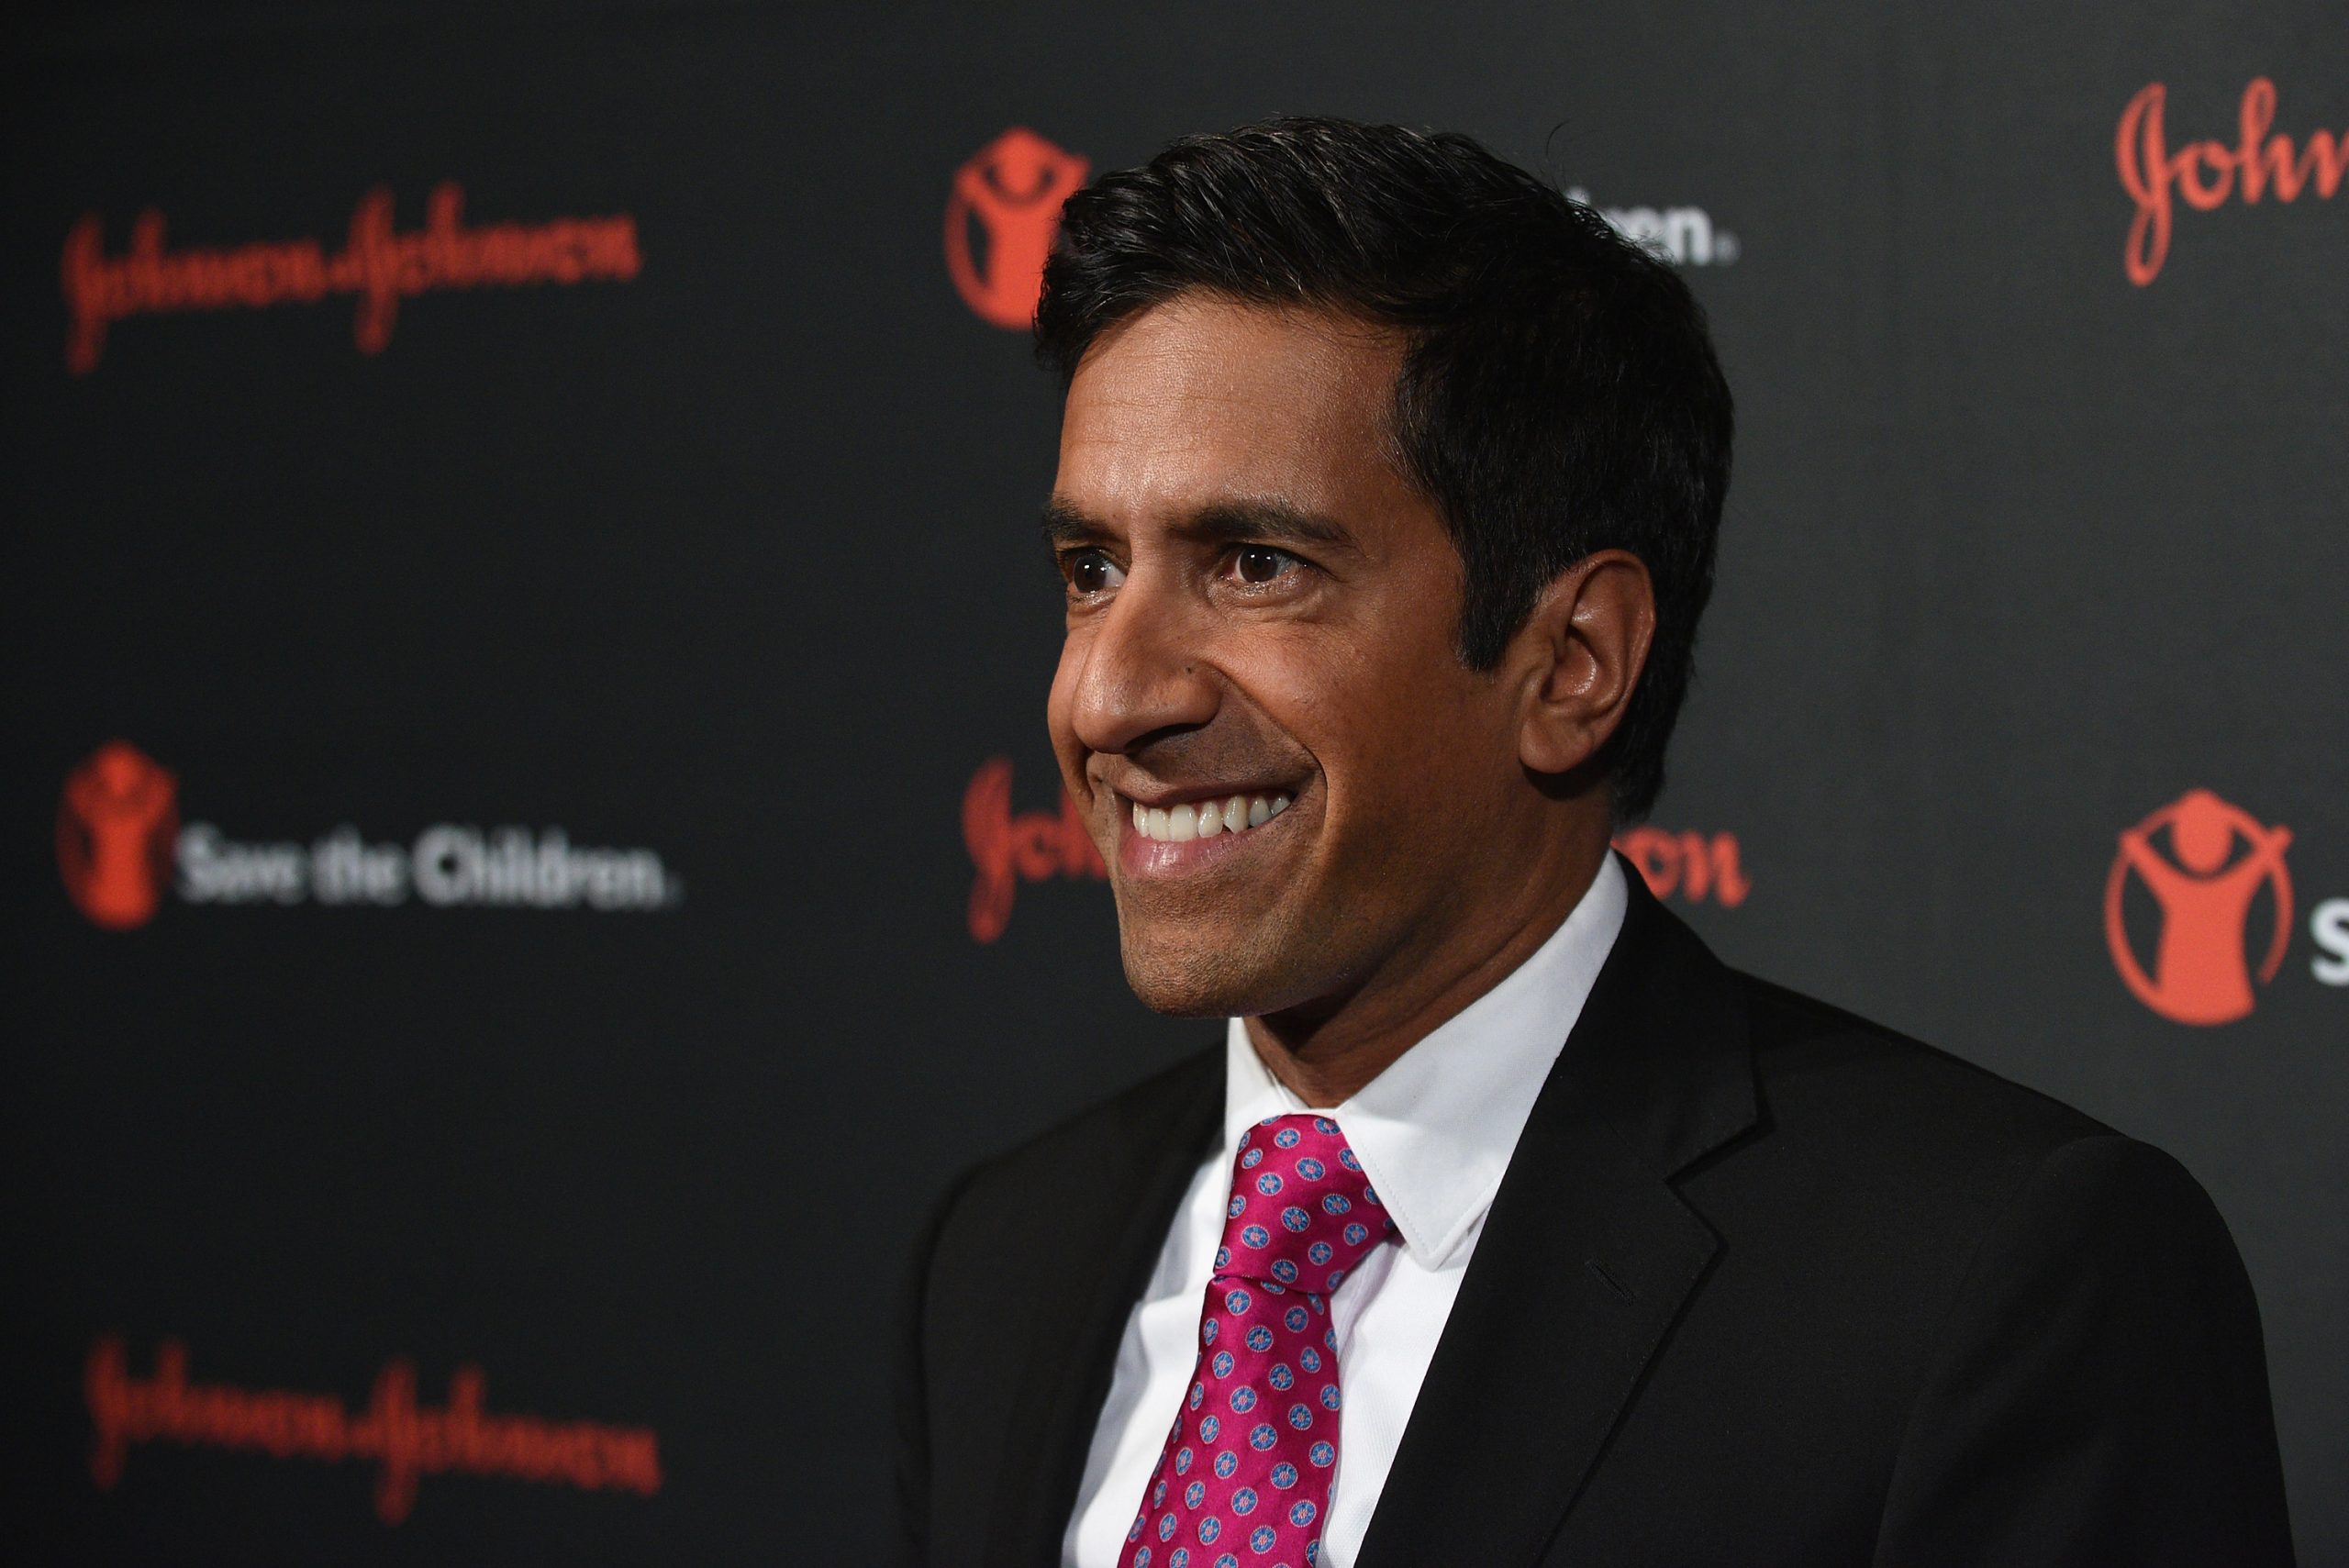 CNN's Dr. Sanjay Gupta smiles as he attends an event in 2015.